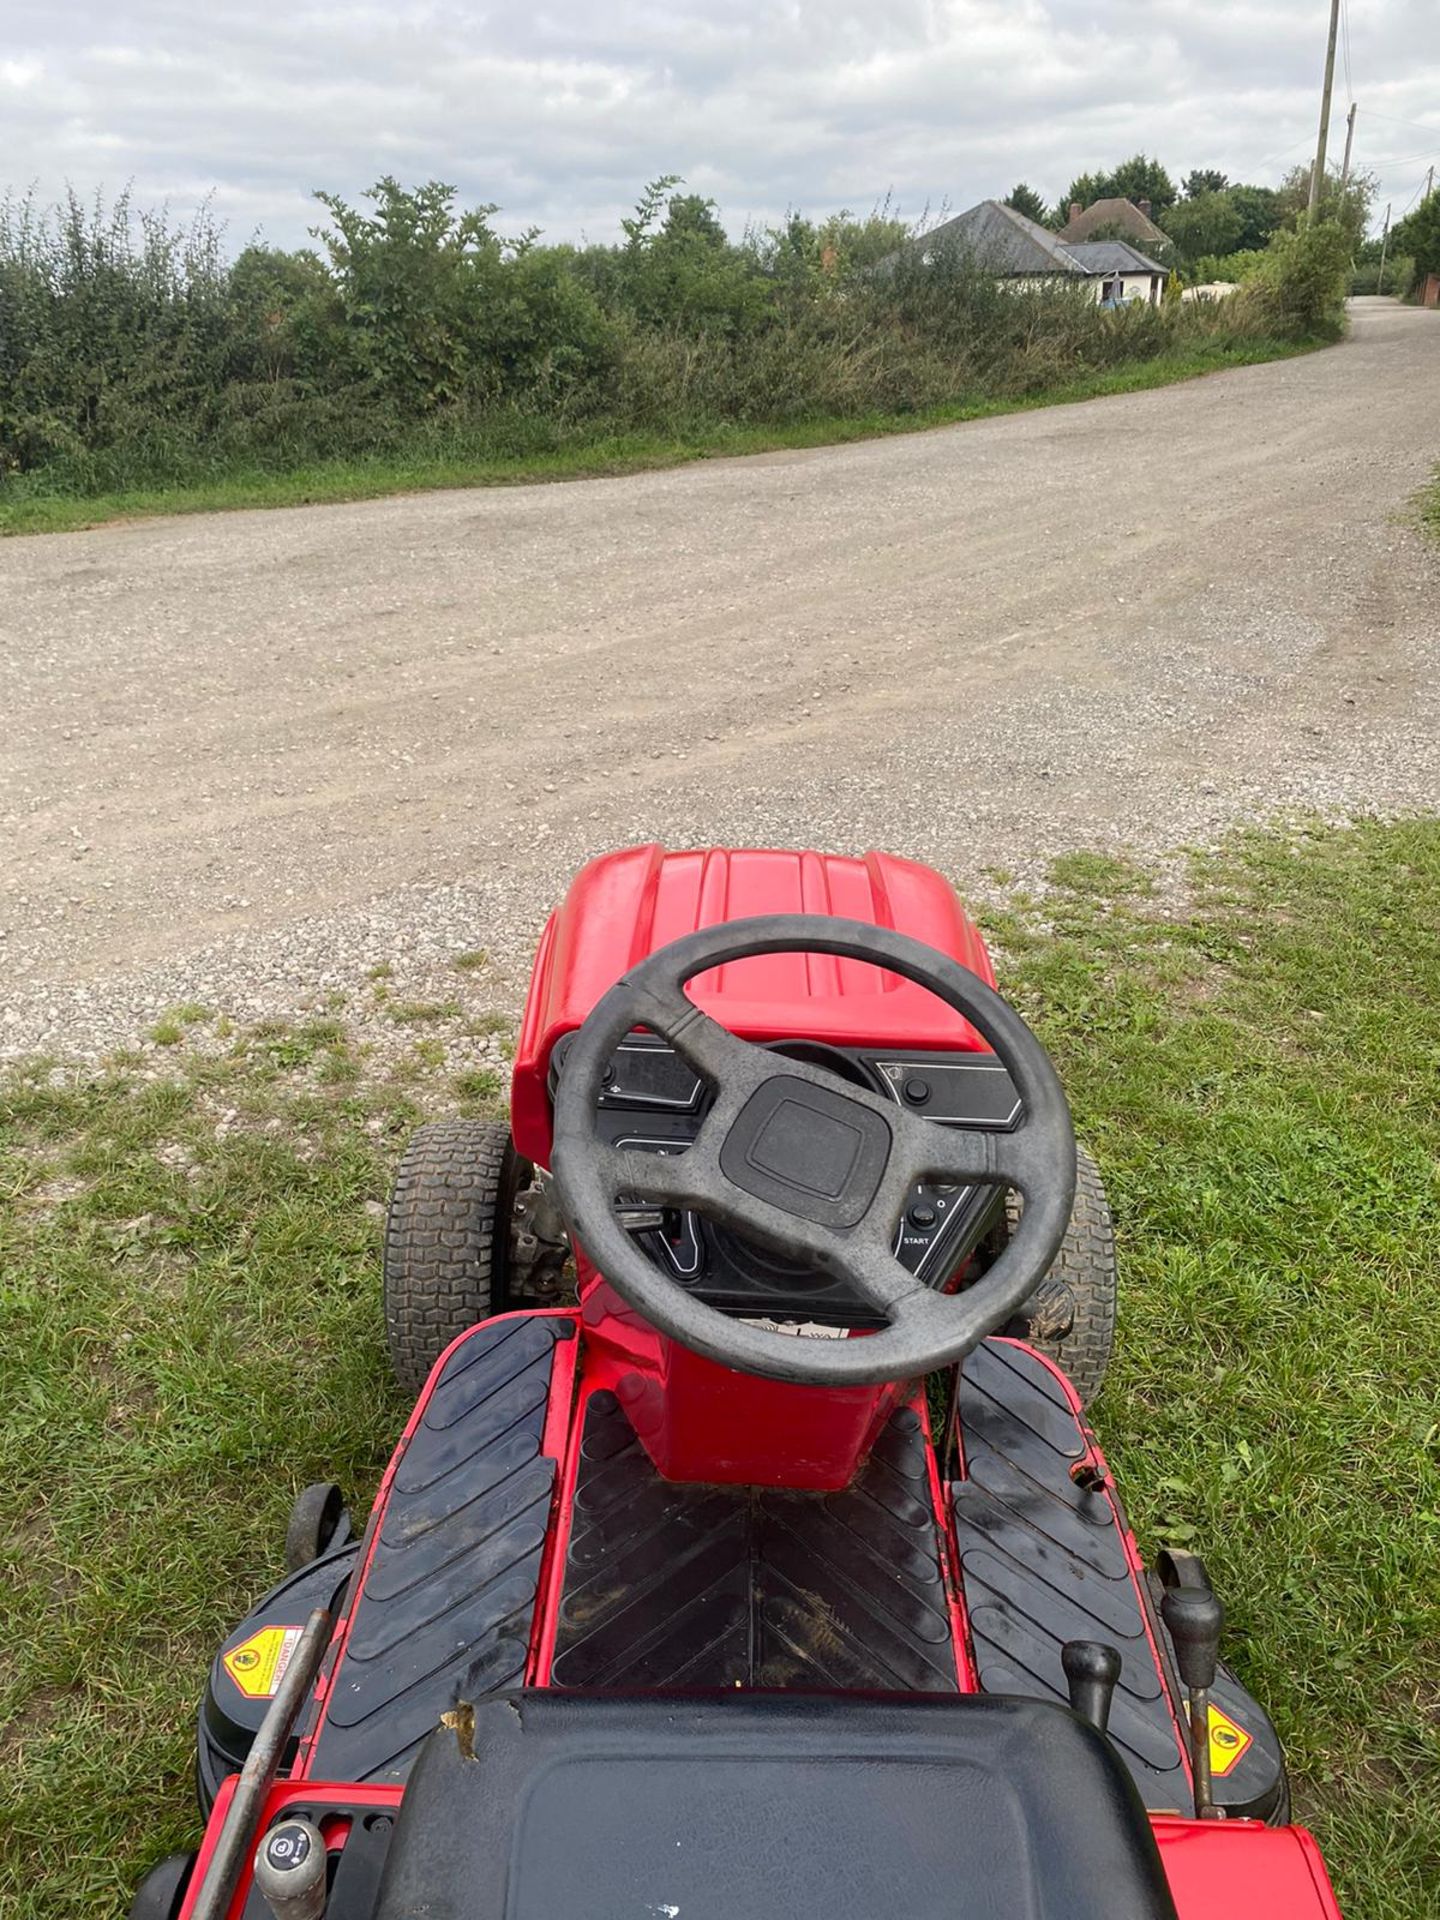 COUNTAX C600H 4 WHEEL DRIVE RIDE ON LAWN MOWER, RUNS DRIVES CUTS AND COLLECTS *NO VAT* - Image 11 of 11